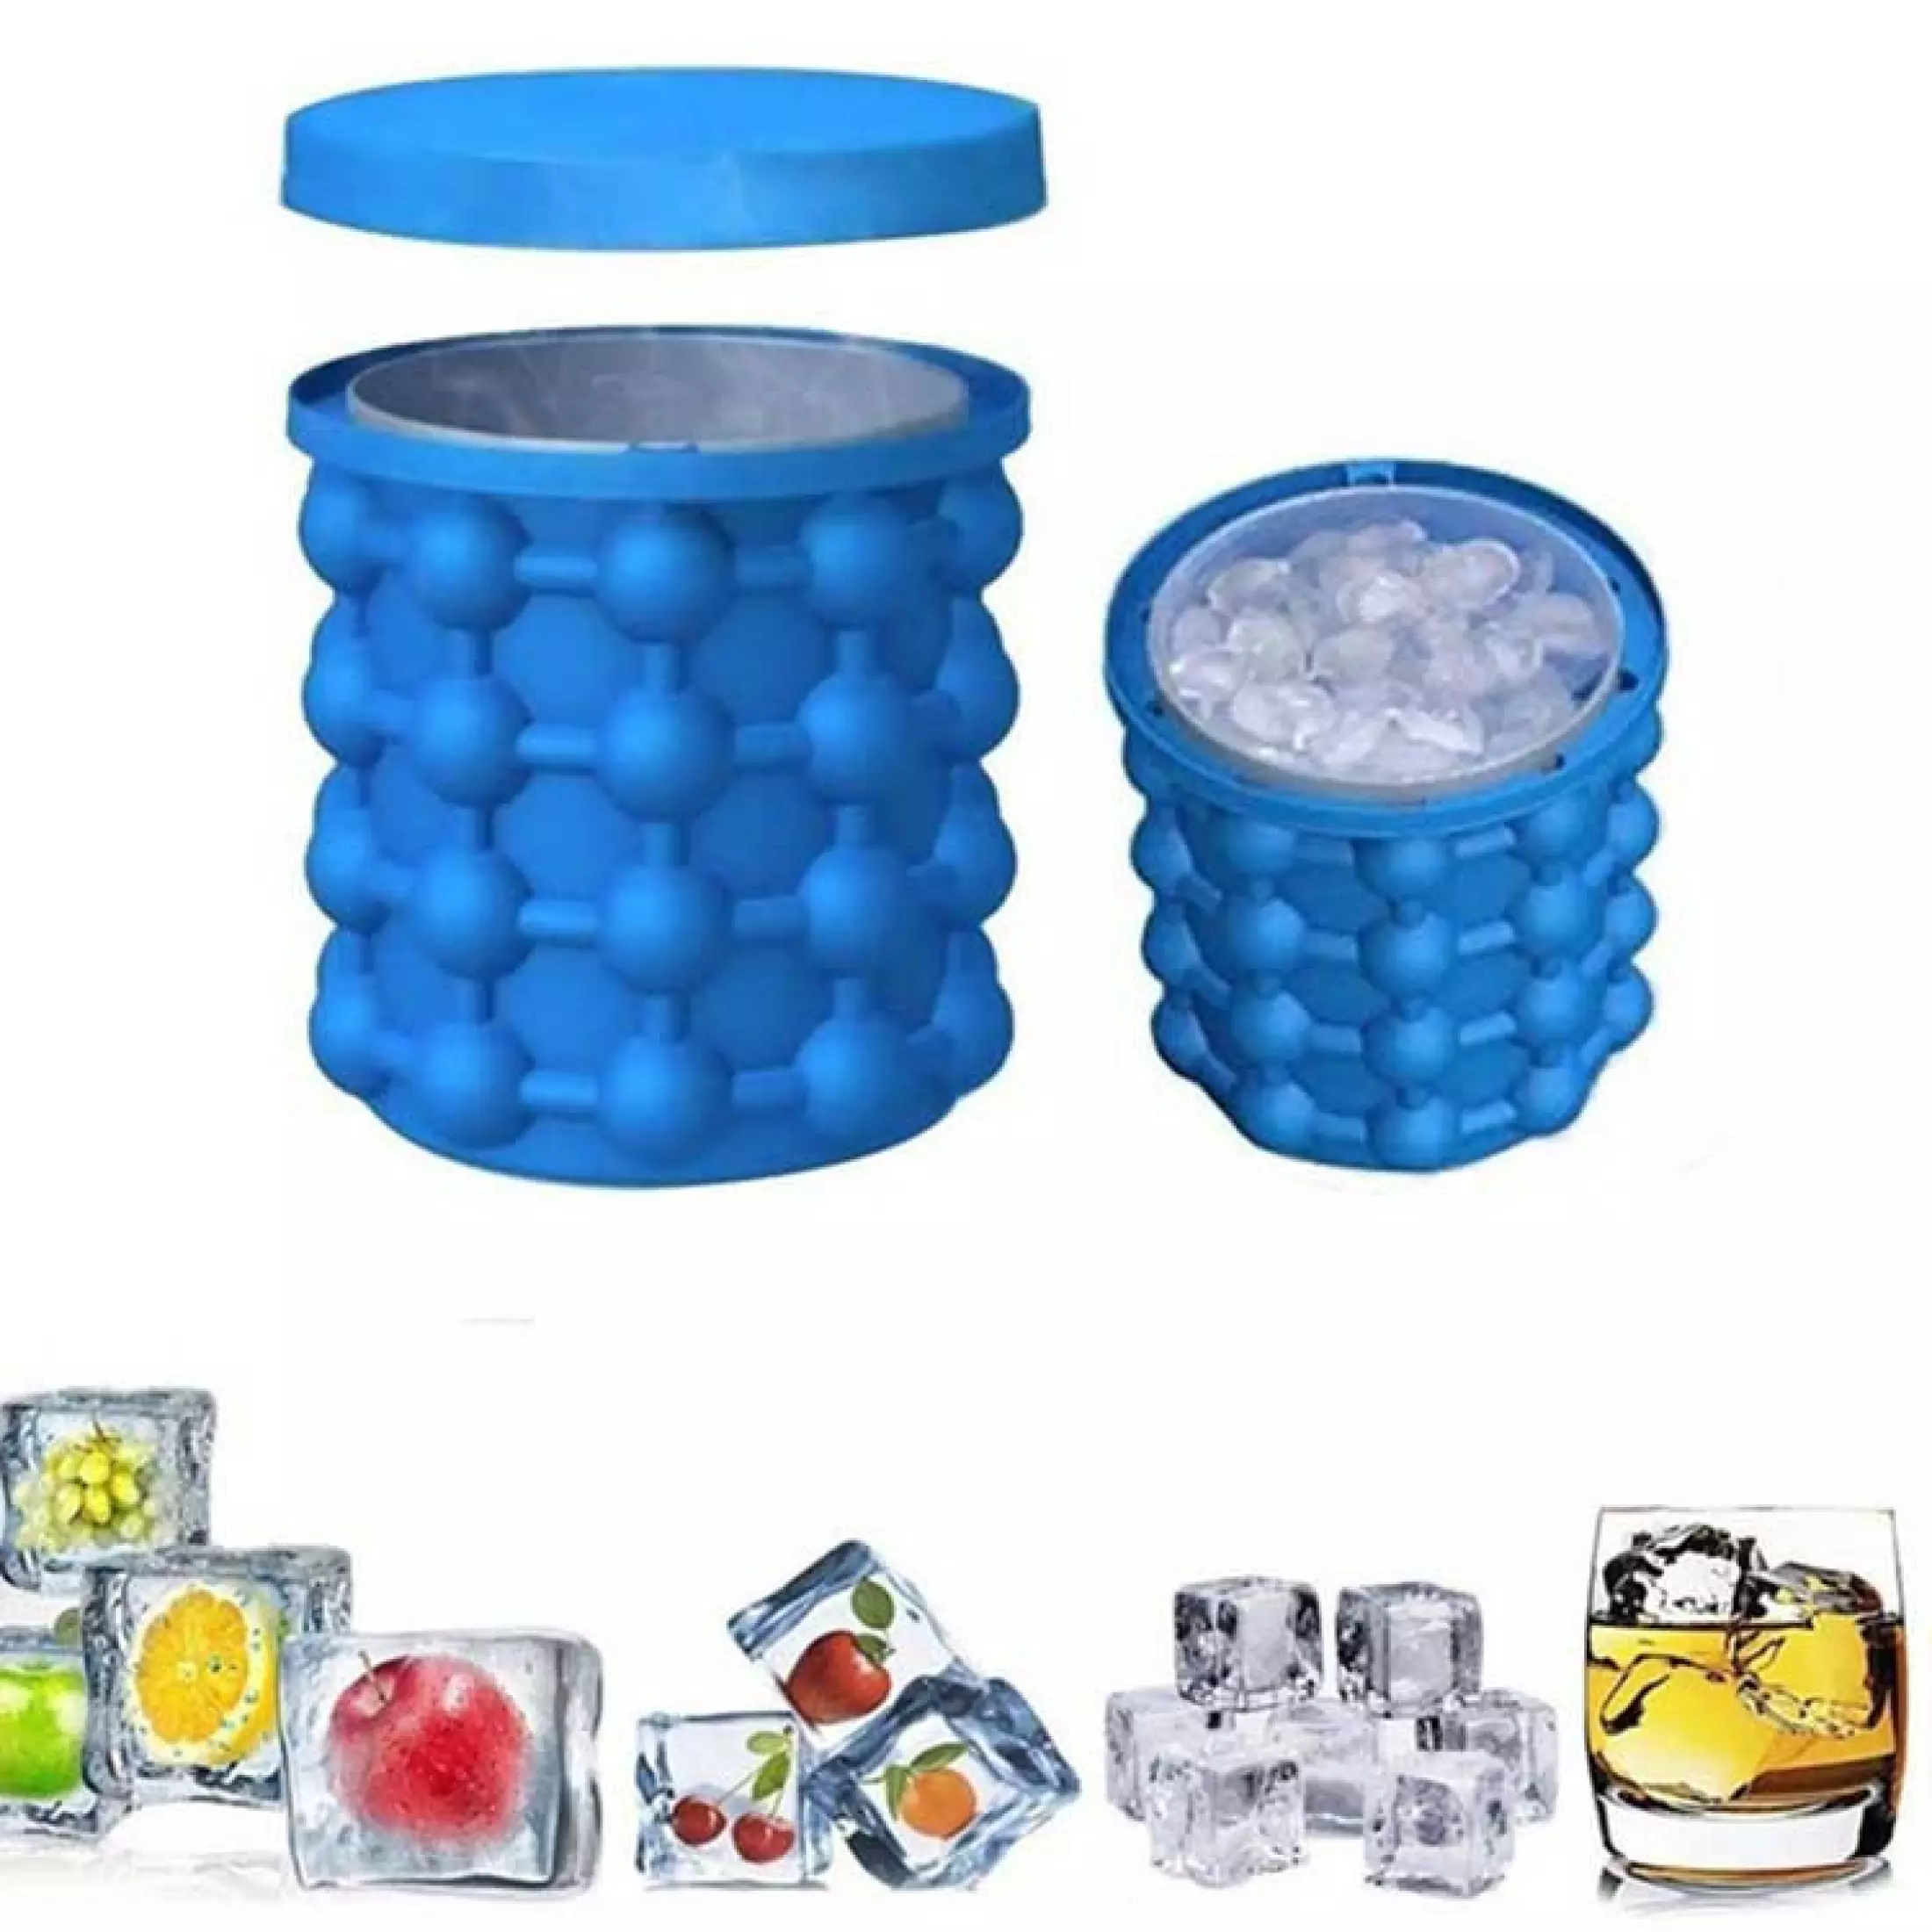 ice maker Ice Cube Maker Genie The Revolutionary Space, Food grade silicone  ice bucket / ice cube maker genie,Quickly freeze bottled beverages. Keep  your red wine cool without dilutio. | Lazada PH